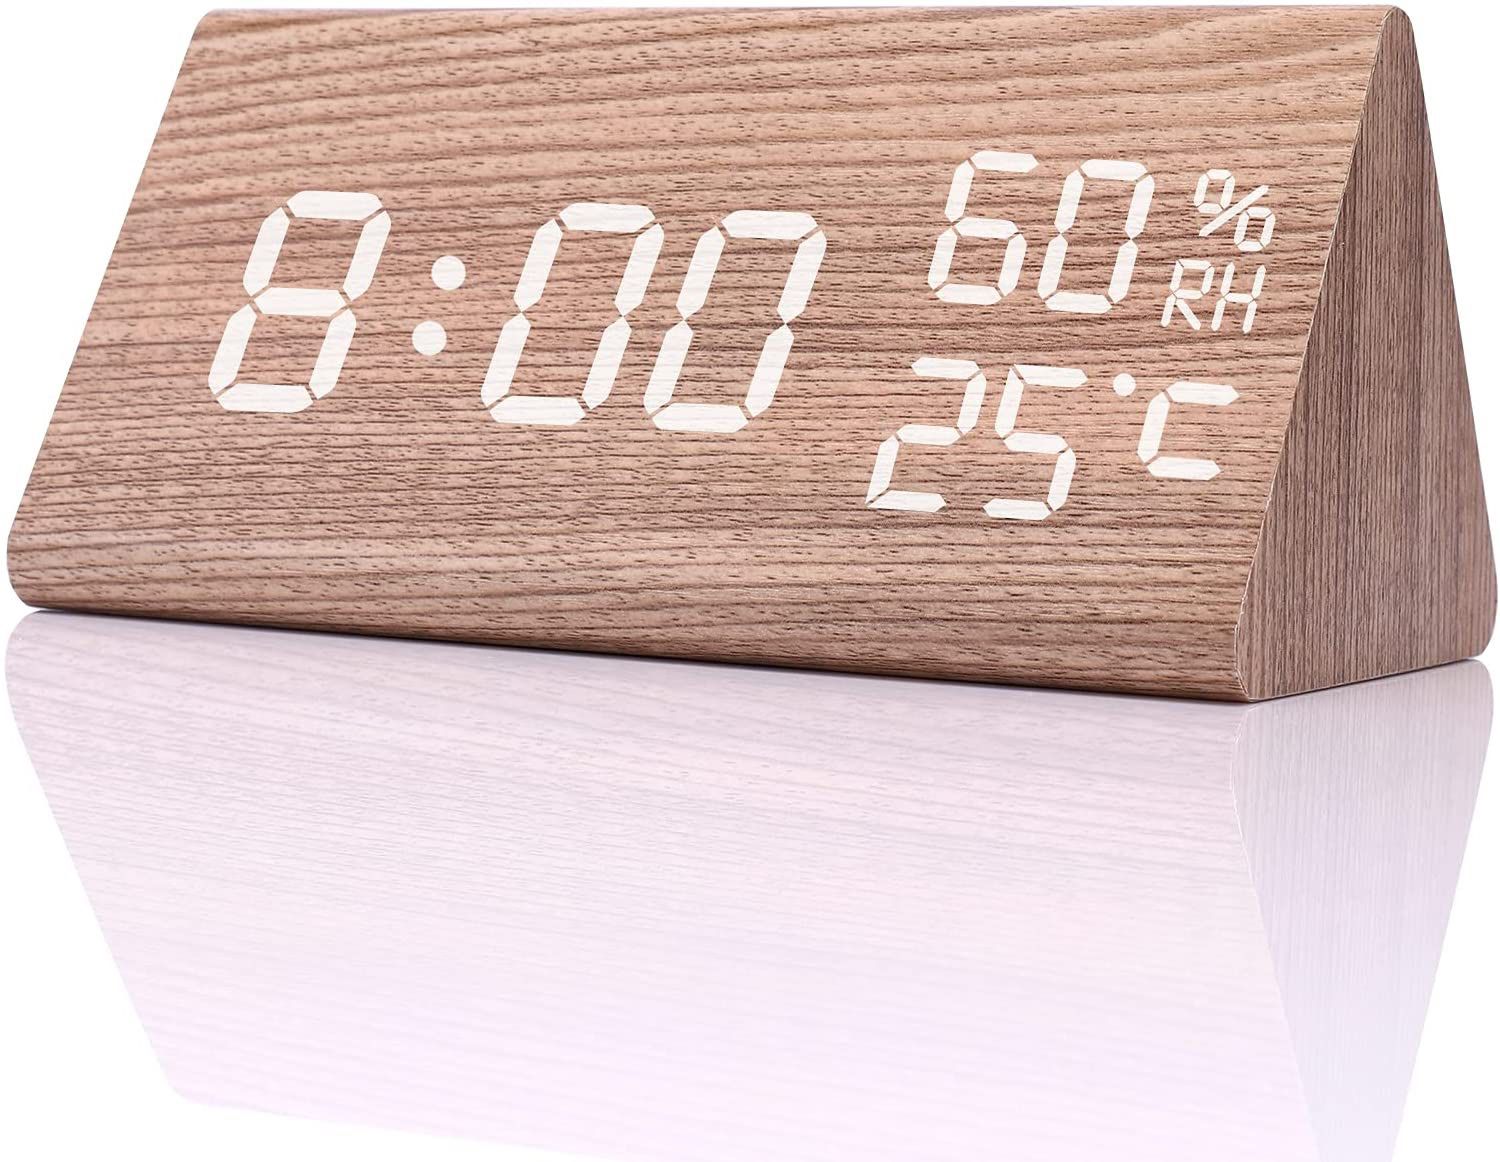 Wooden Digital Alarm Small Clock ,Electronic LED Time Date Display Adjustable Brightness,3 Alarm Settings, Humidity & Temperature Detect for Bedroom O